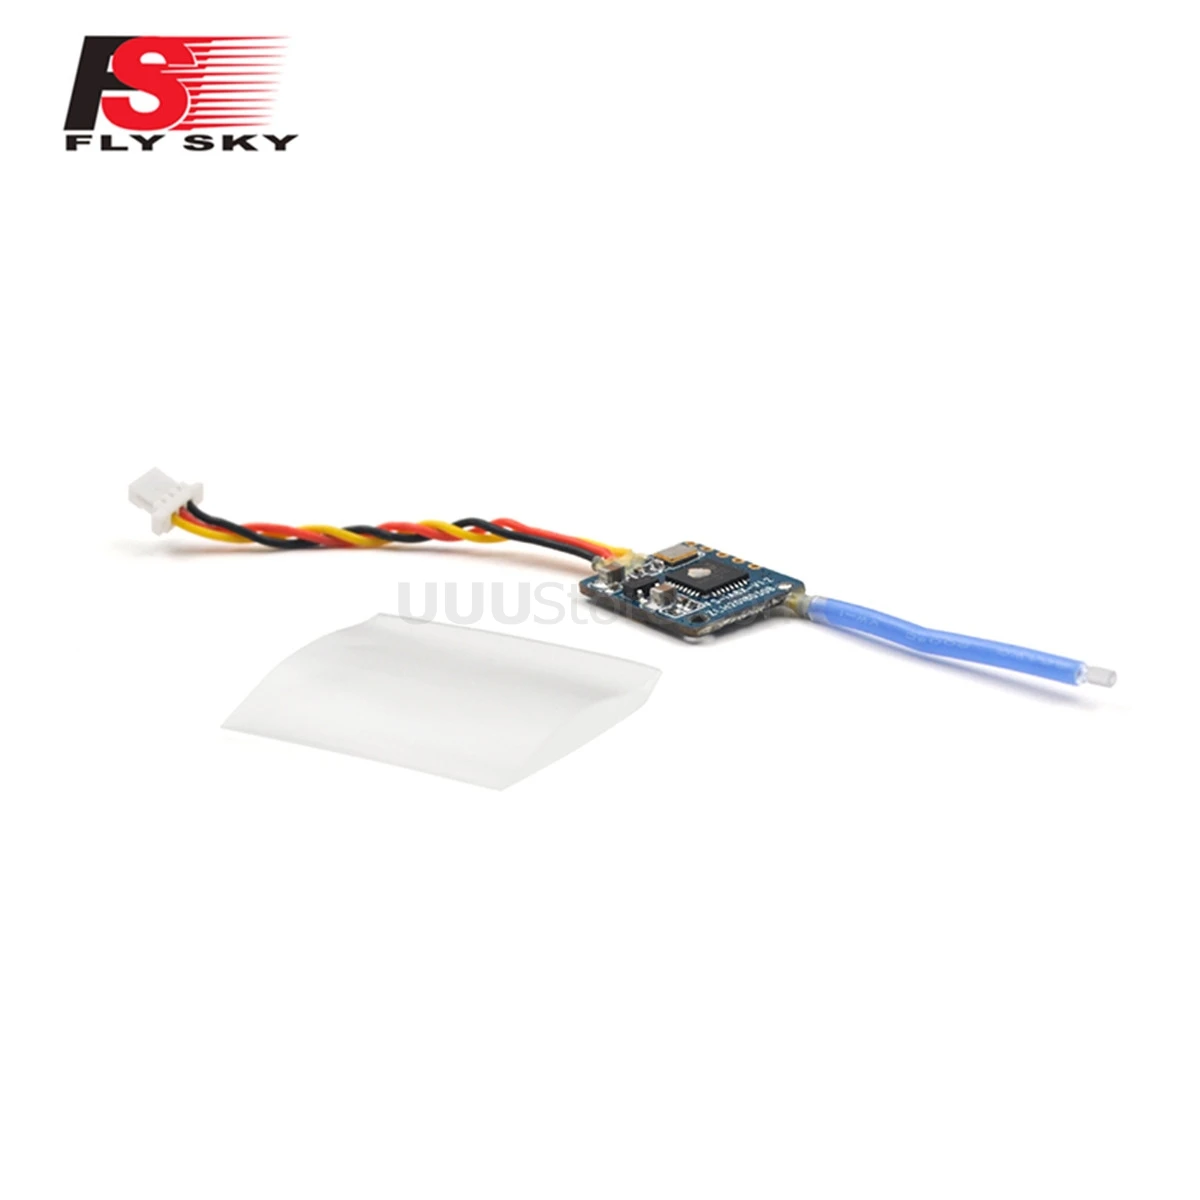 2019 new Flysky IA8X 2.4G 8CH PPM i-BUS Mini Receiver for AFHDS 2A FS-NV14 RC Drone Quadcopter Radio Spare Part DIY Accessories 2